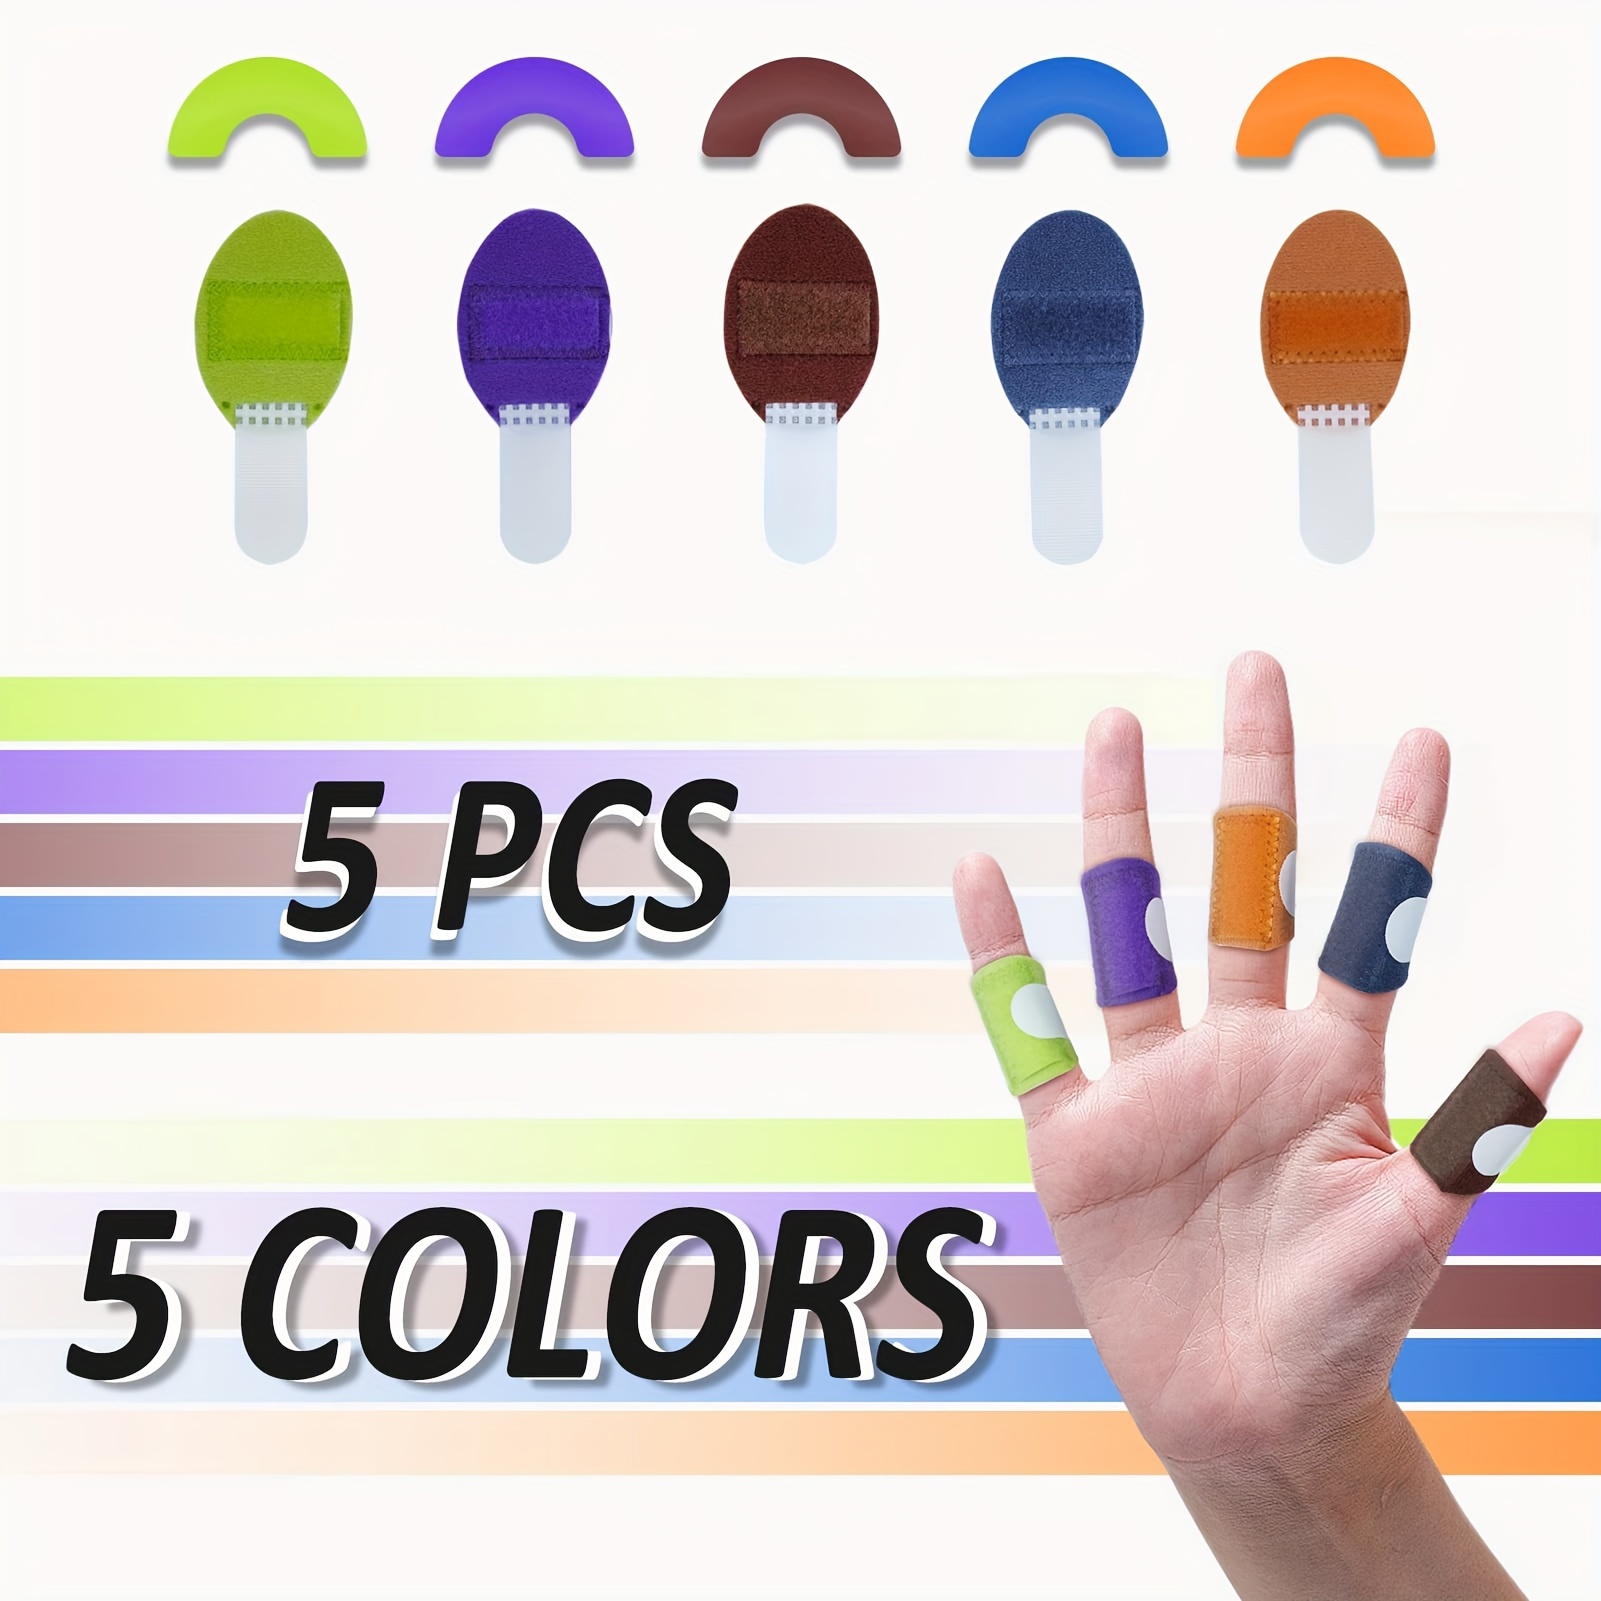 3pcs/6pcs-Set Of Silicone Finger Protectors For Hot Glue Gun, 4 Colors  Finger Protective Caps In 3 Sizes (Random Colors) And Silicone Tip Covers  For Sewing